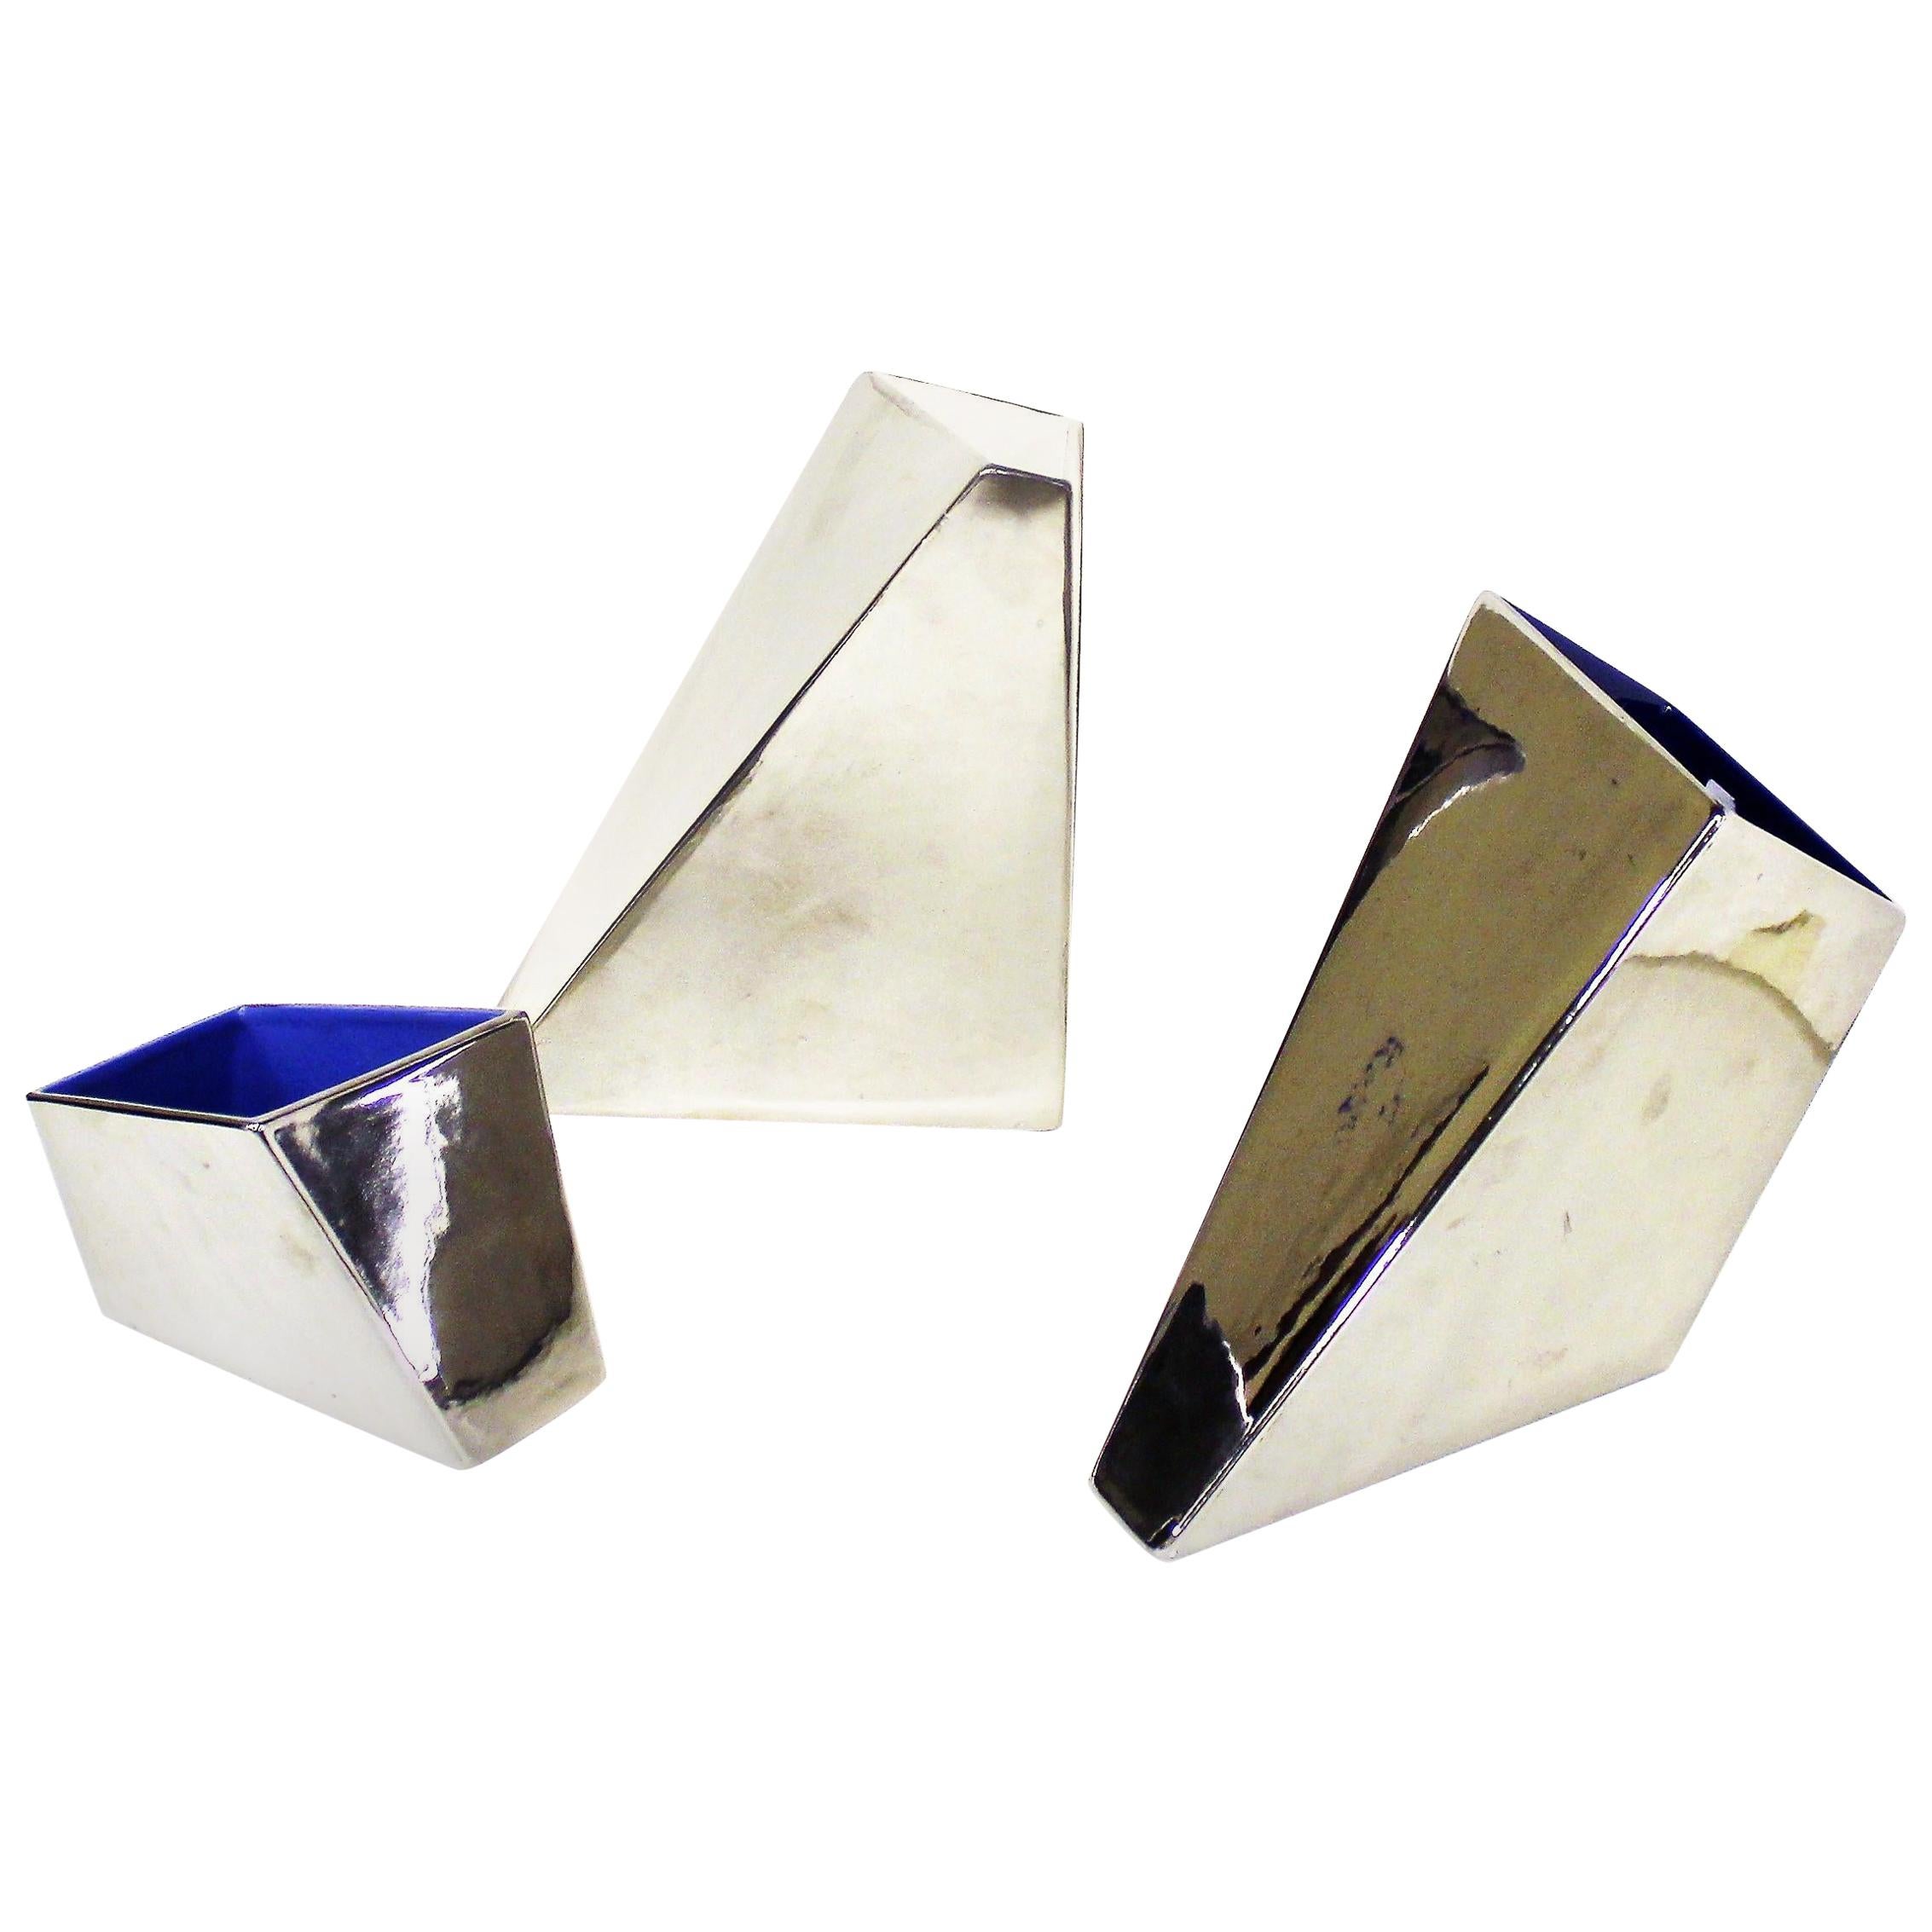 20th Century Chromed Silver Ceramic Irregular Parallelepiped Vases for Driade